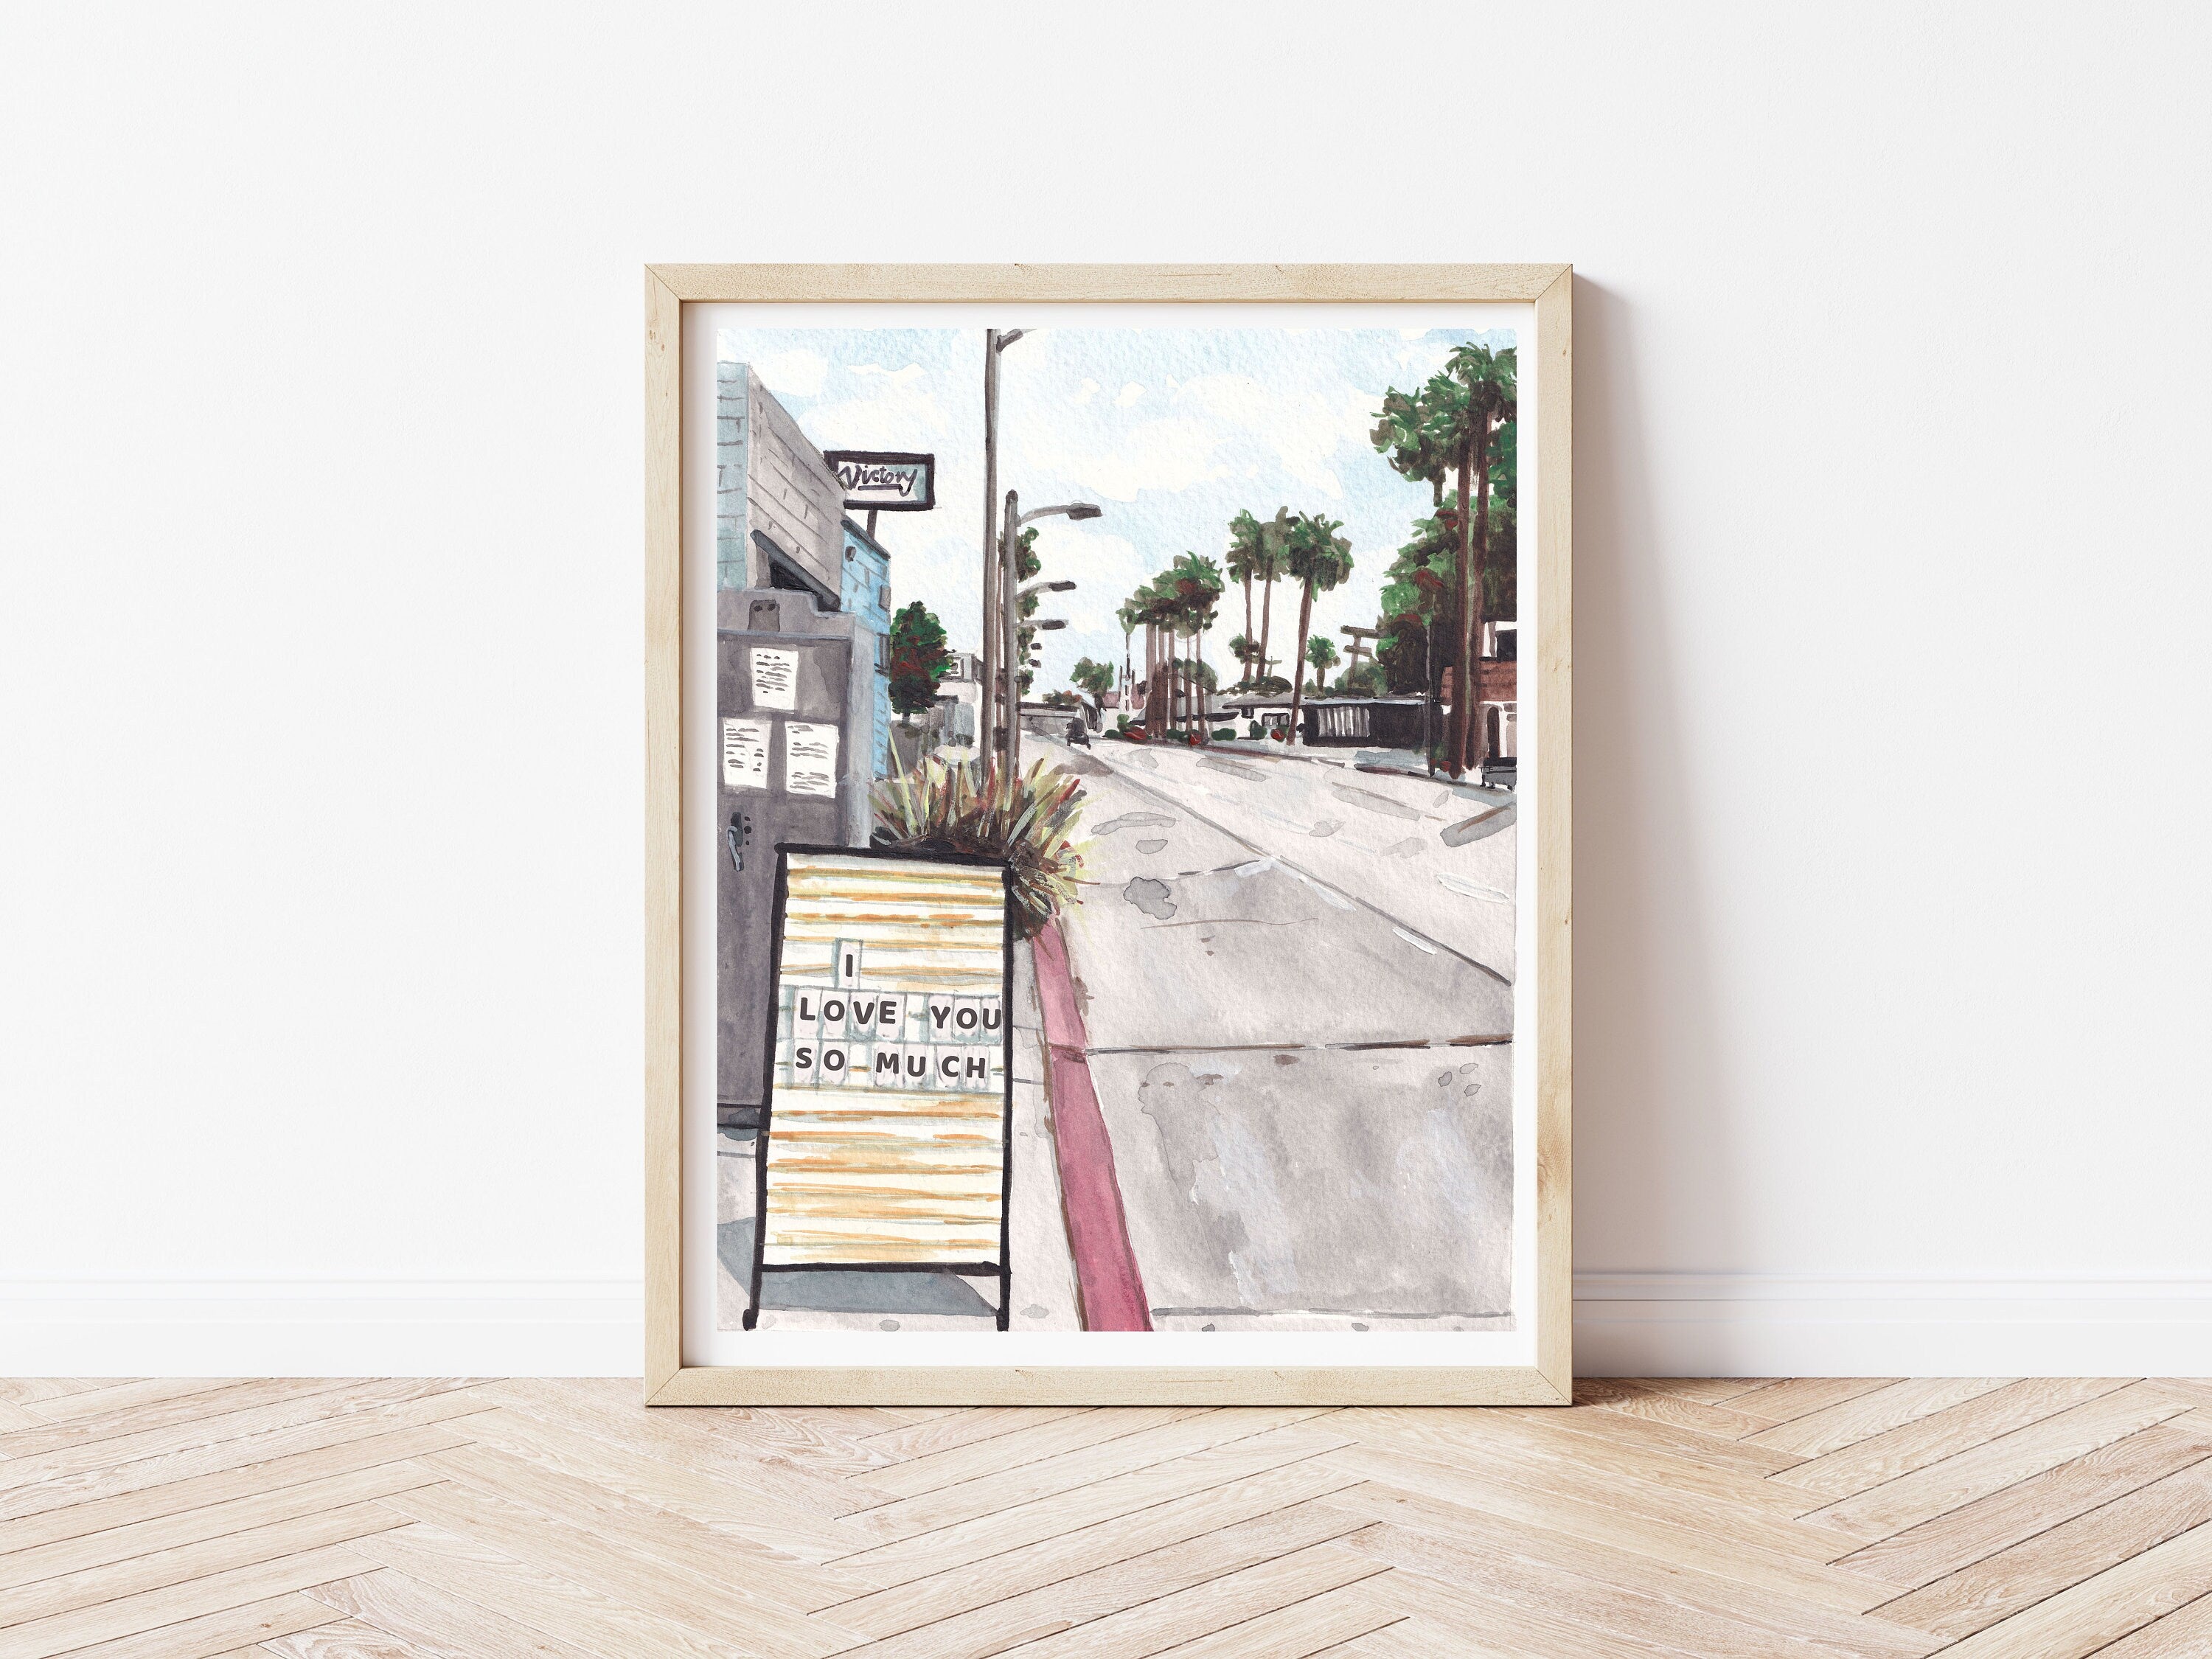 Los Angeles Streetscape - I Love You Sign print of painting by Medjool Studio. Print of original gouache painting of a Los Angeles streetscape, with palm trees, iconic buildings and an "I Love You" sign. 